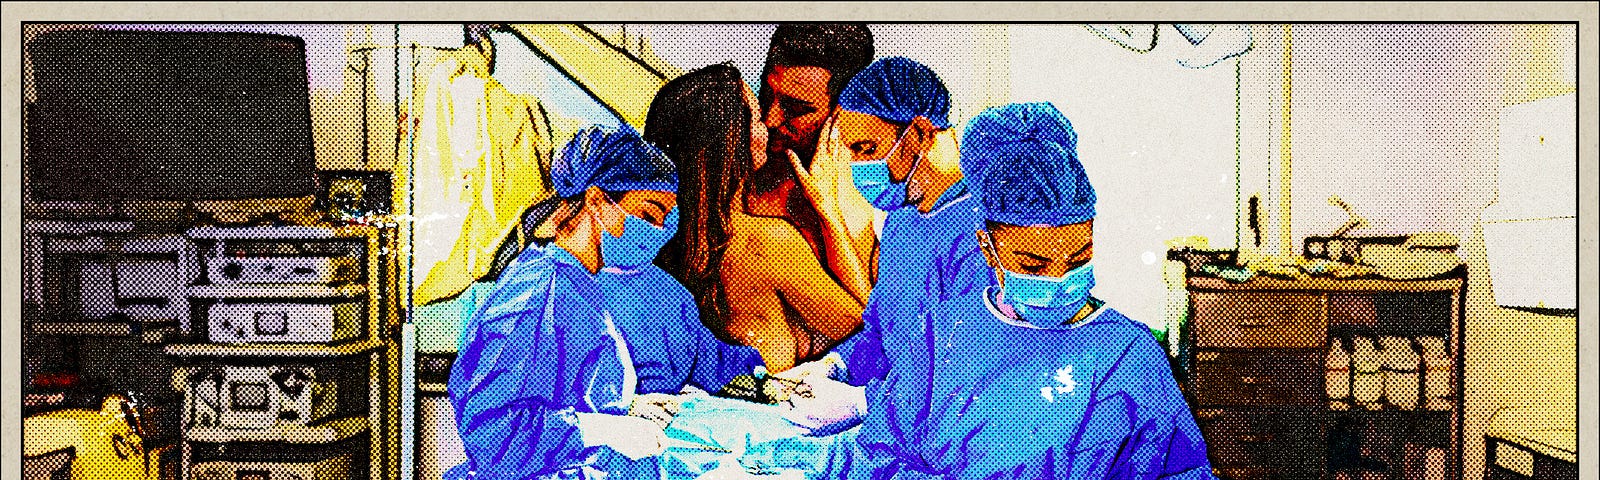 Doctor and nurse make out behind surgical team